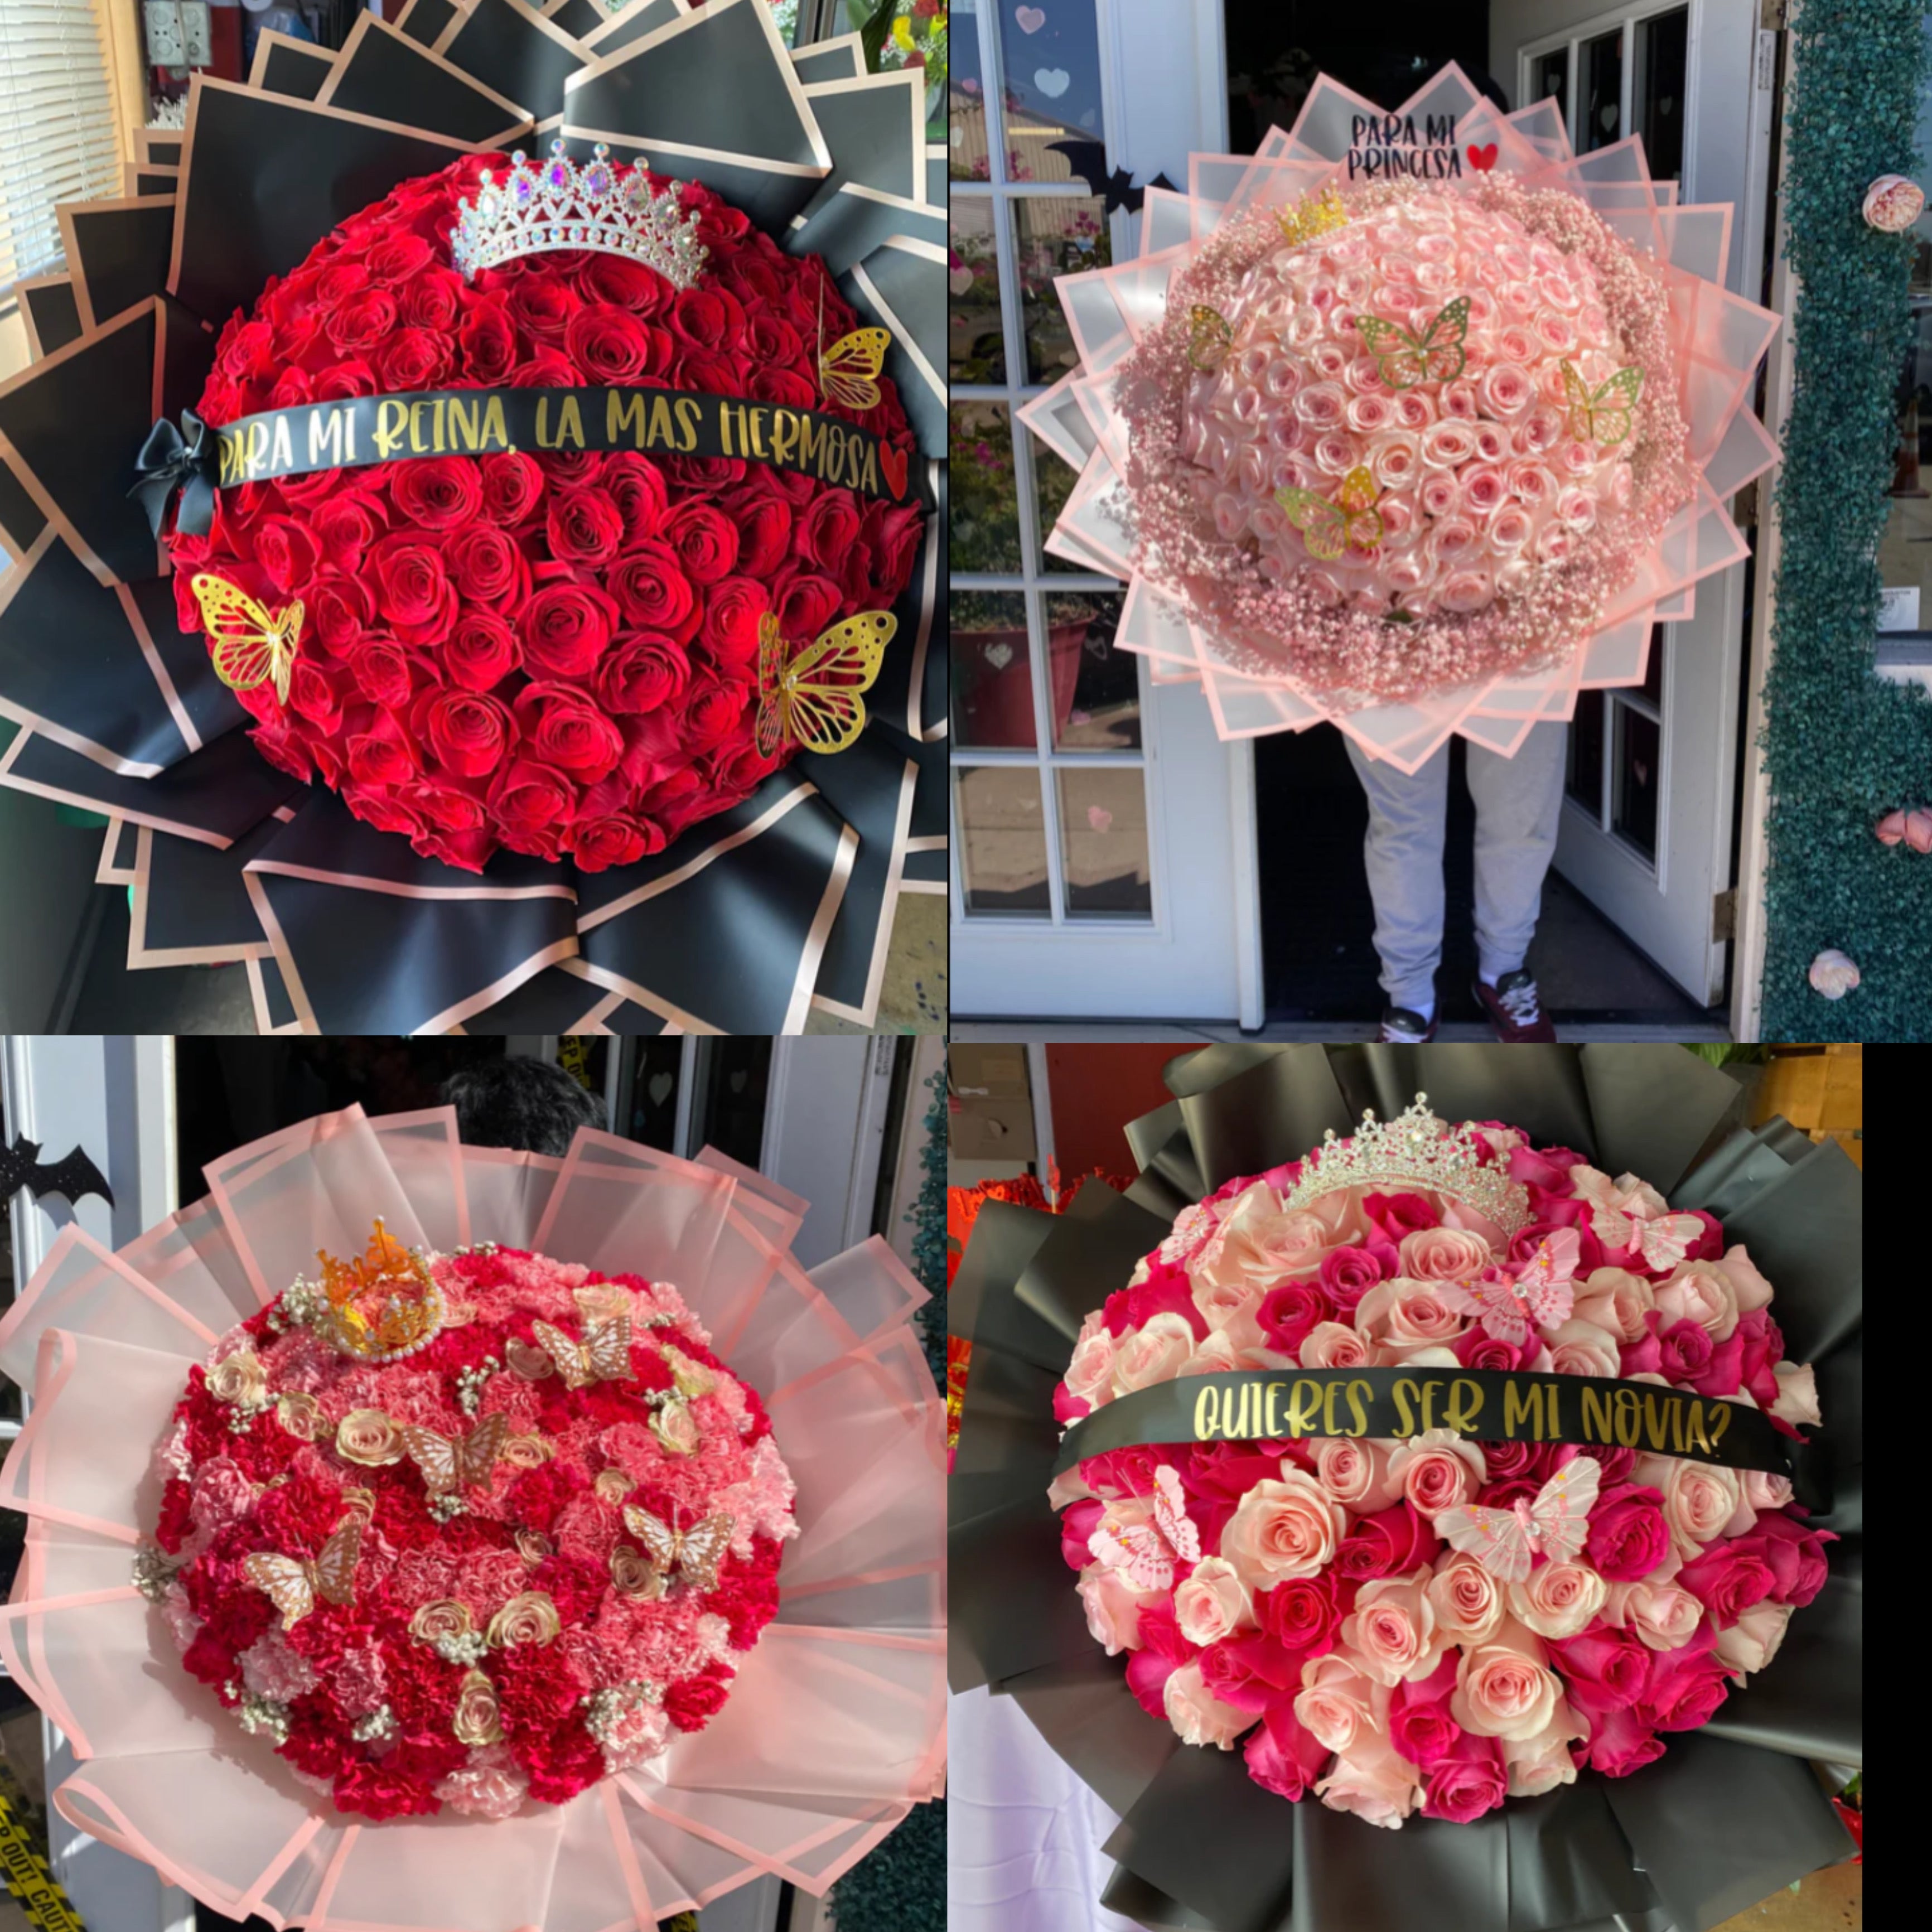 LA BUCHONA BOUQUET 100 ROSES by The Chocolate Rose